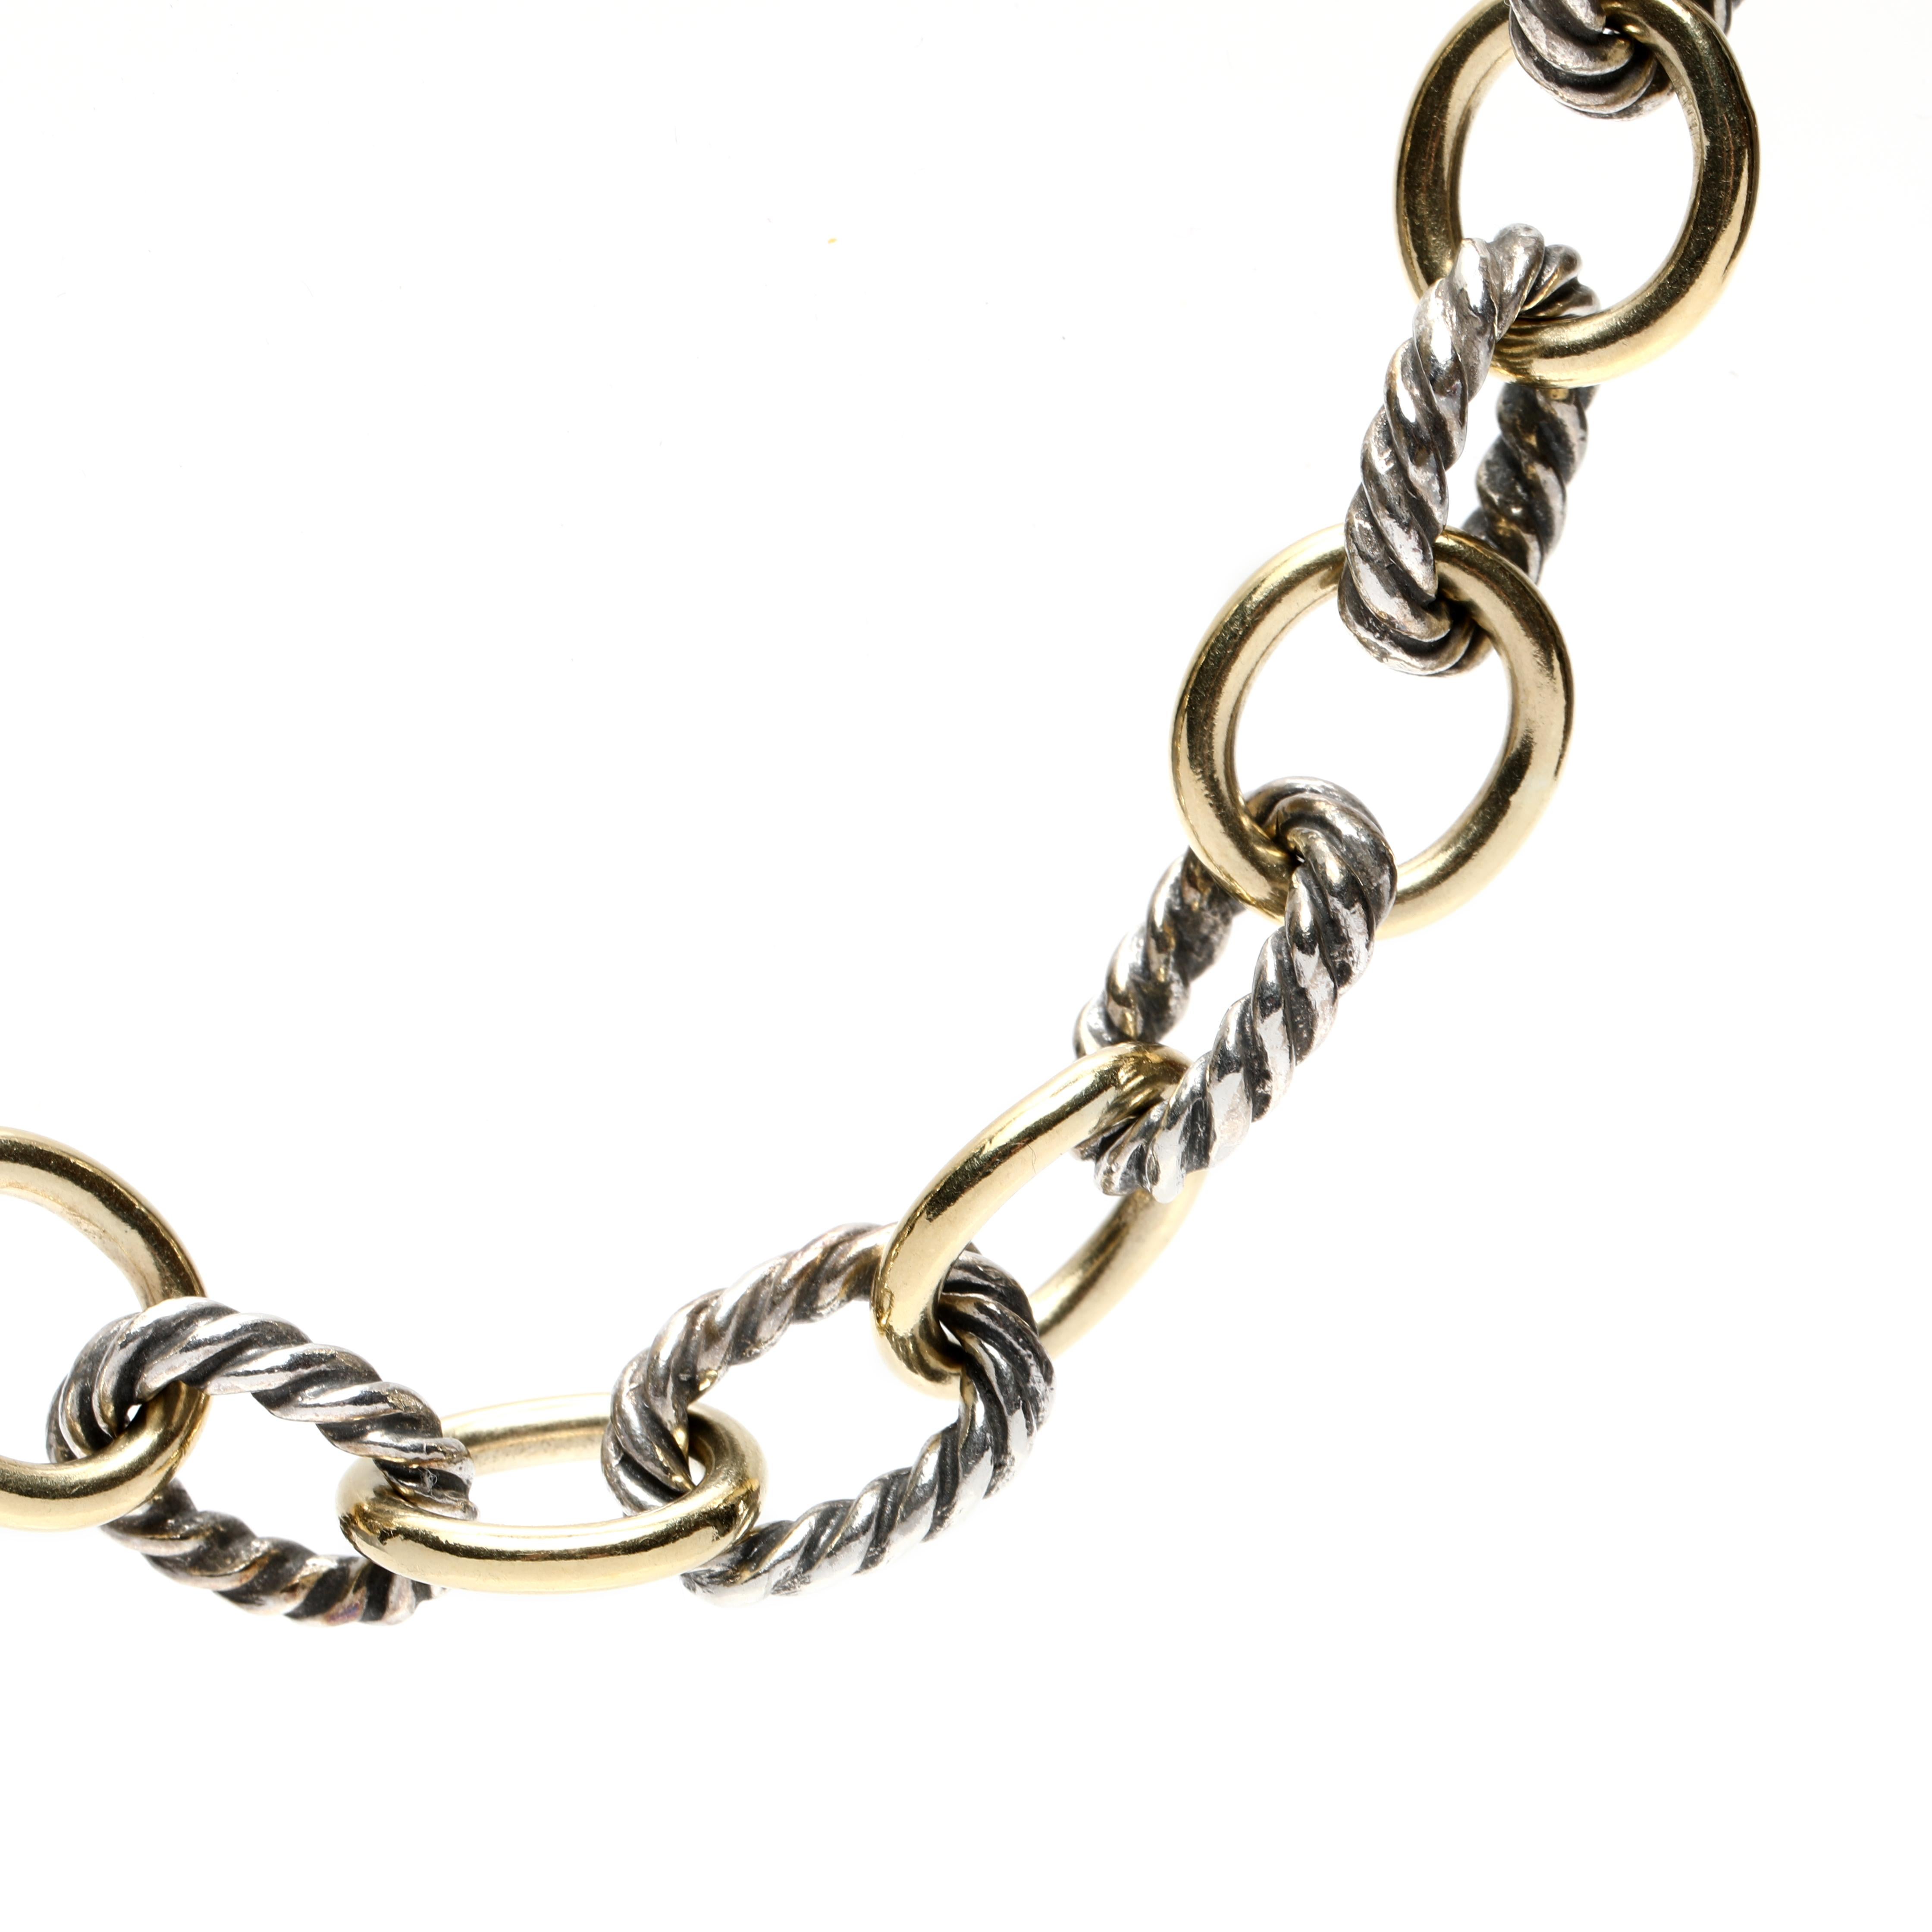 This exquisite David Yurman Cable Classics Medium Oval Link Chain is crafted in 18K yellow gold and sterling silver. This two-tone oval link chain features a unique blend of elegance and sophistication, perfect for any occasion. The 16-inch Cable